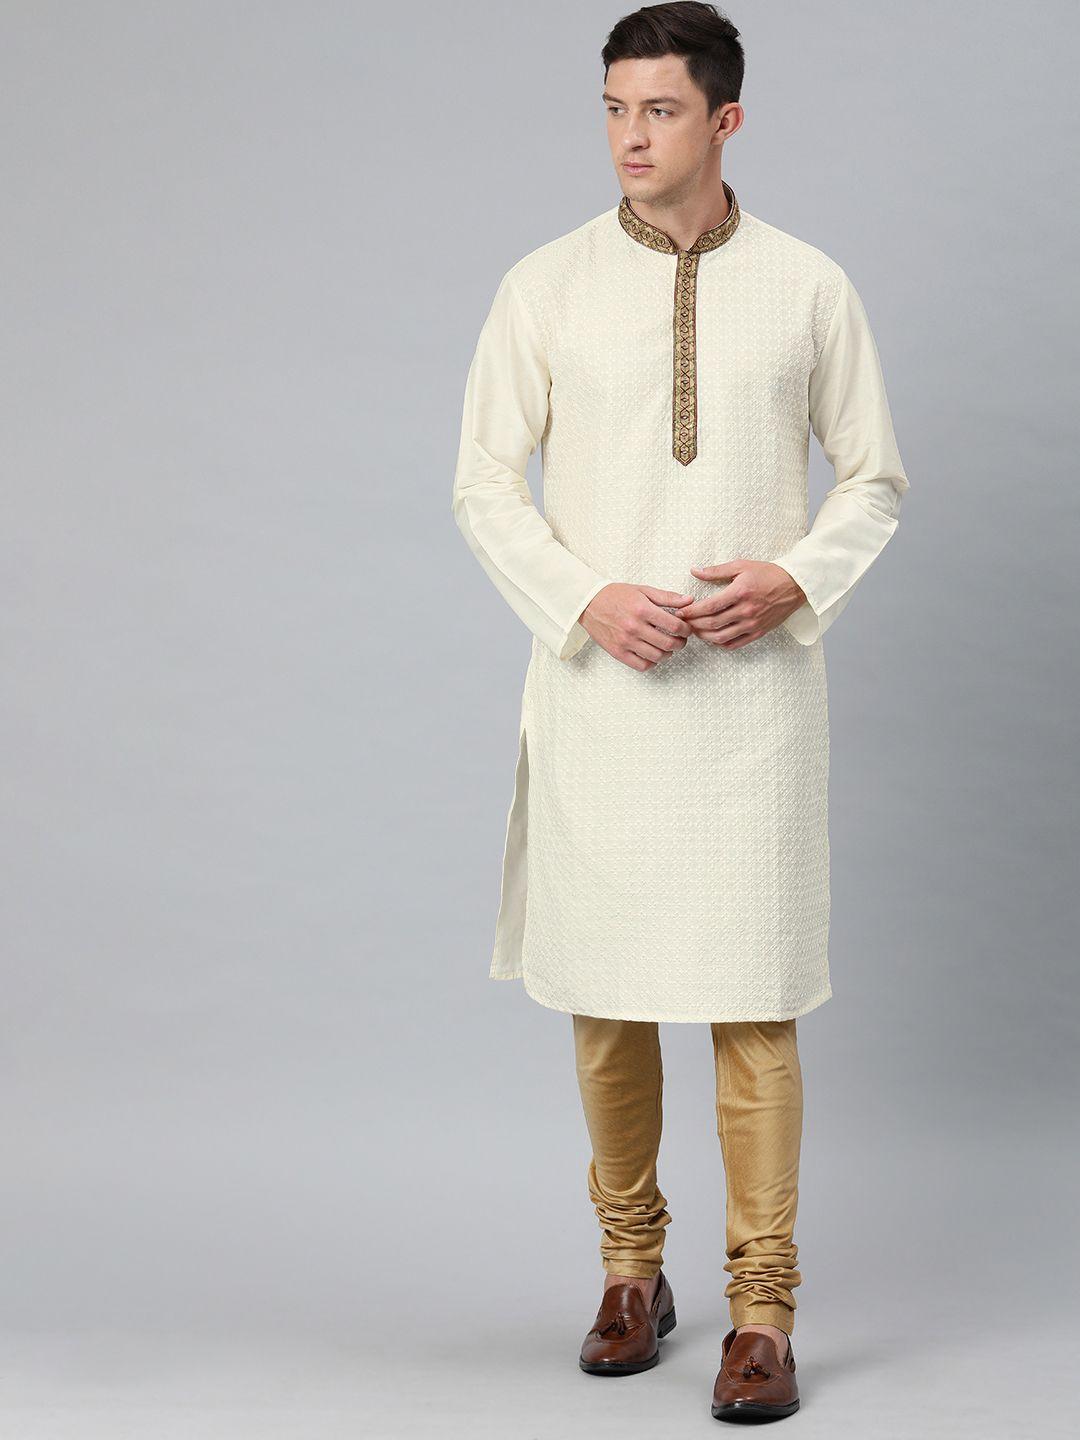 ethnix by raymond men white & beige embroidered kurta with trousers